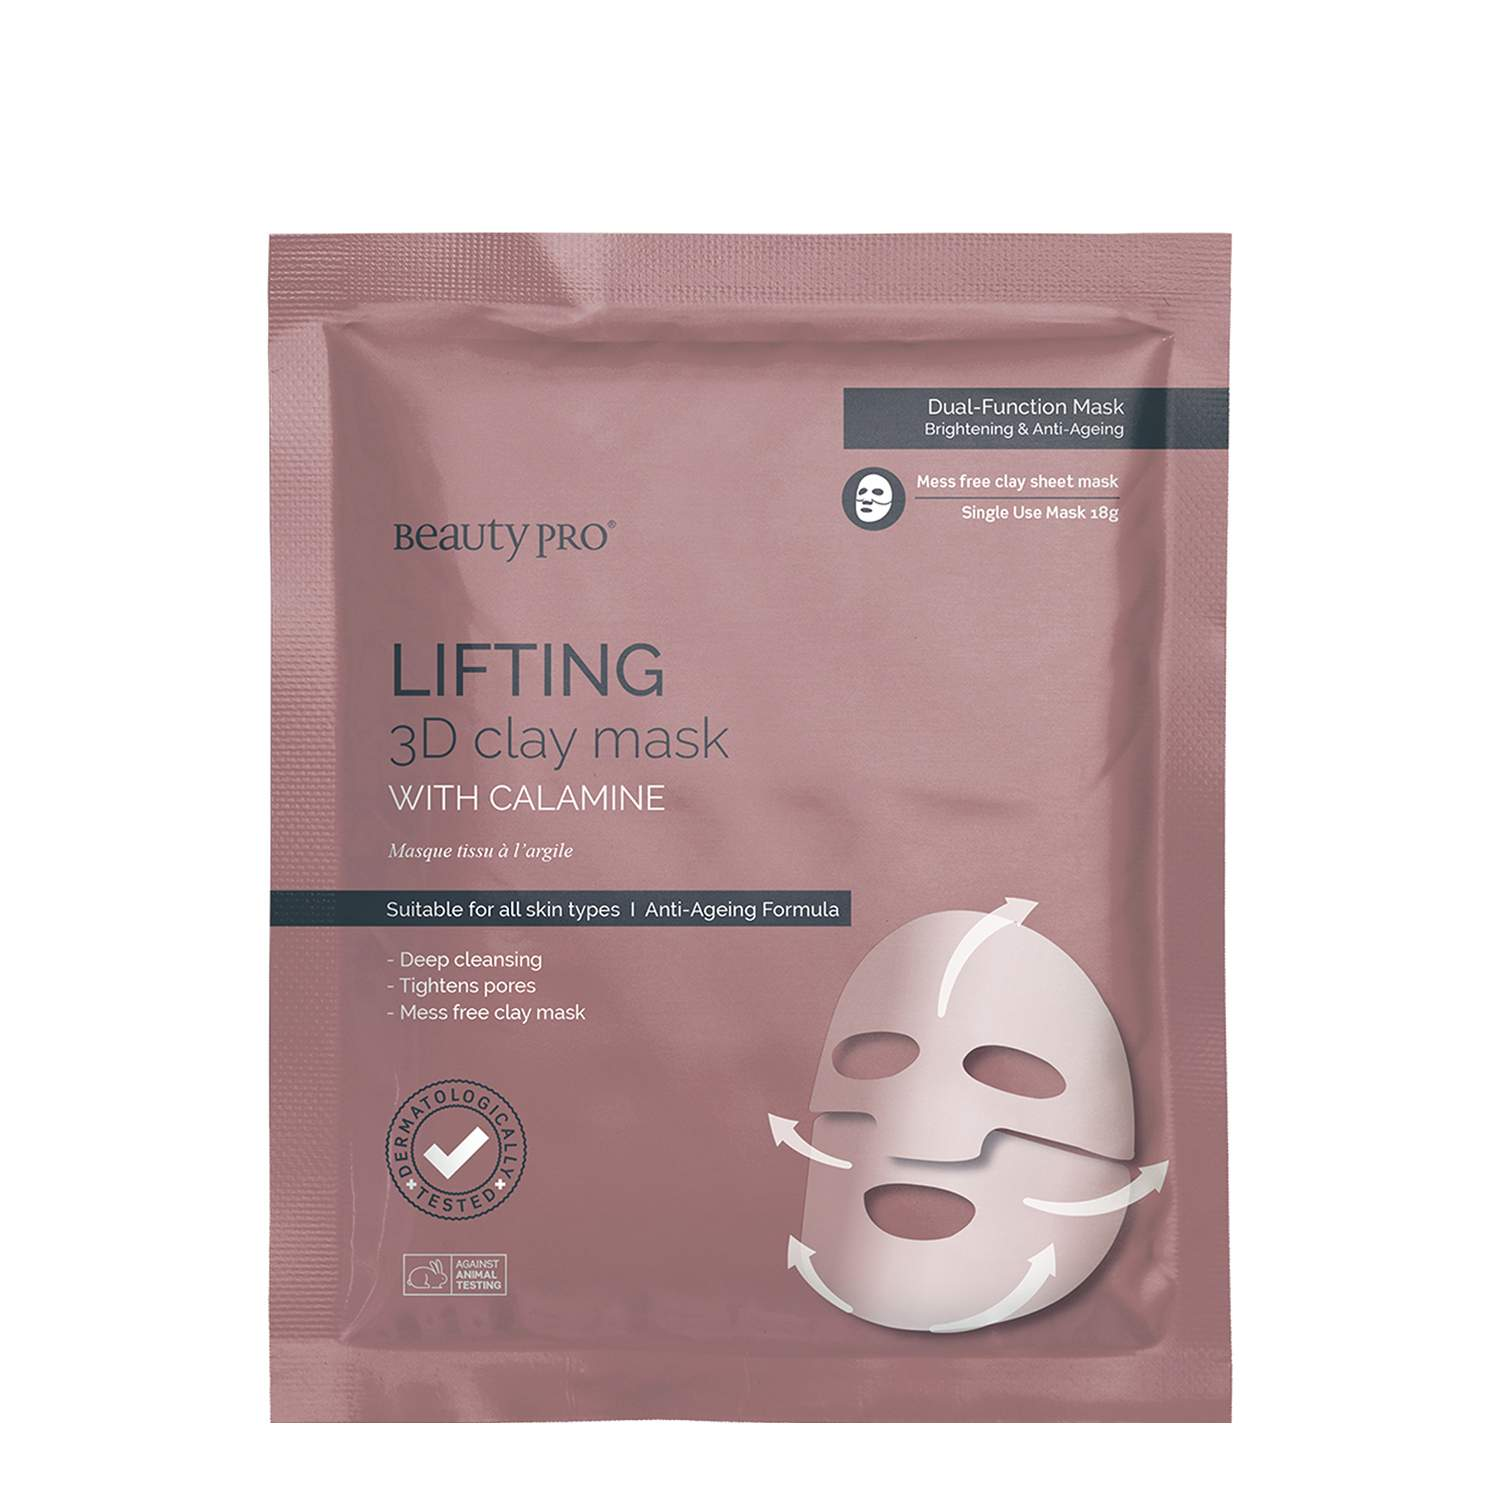 BeautyPro LIFTING 3D Clay Mask with Calamine